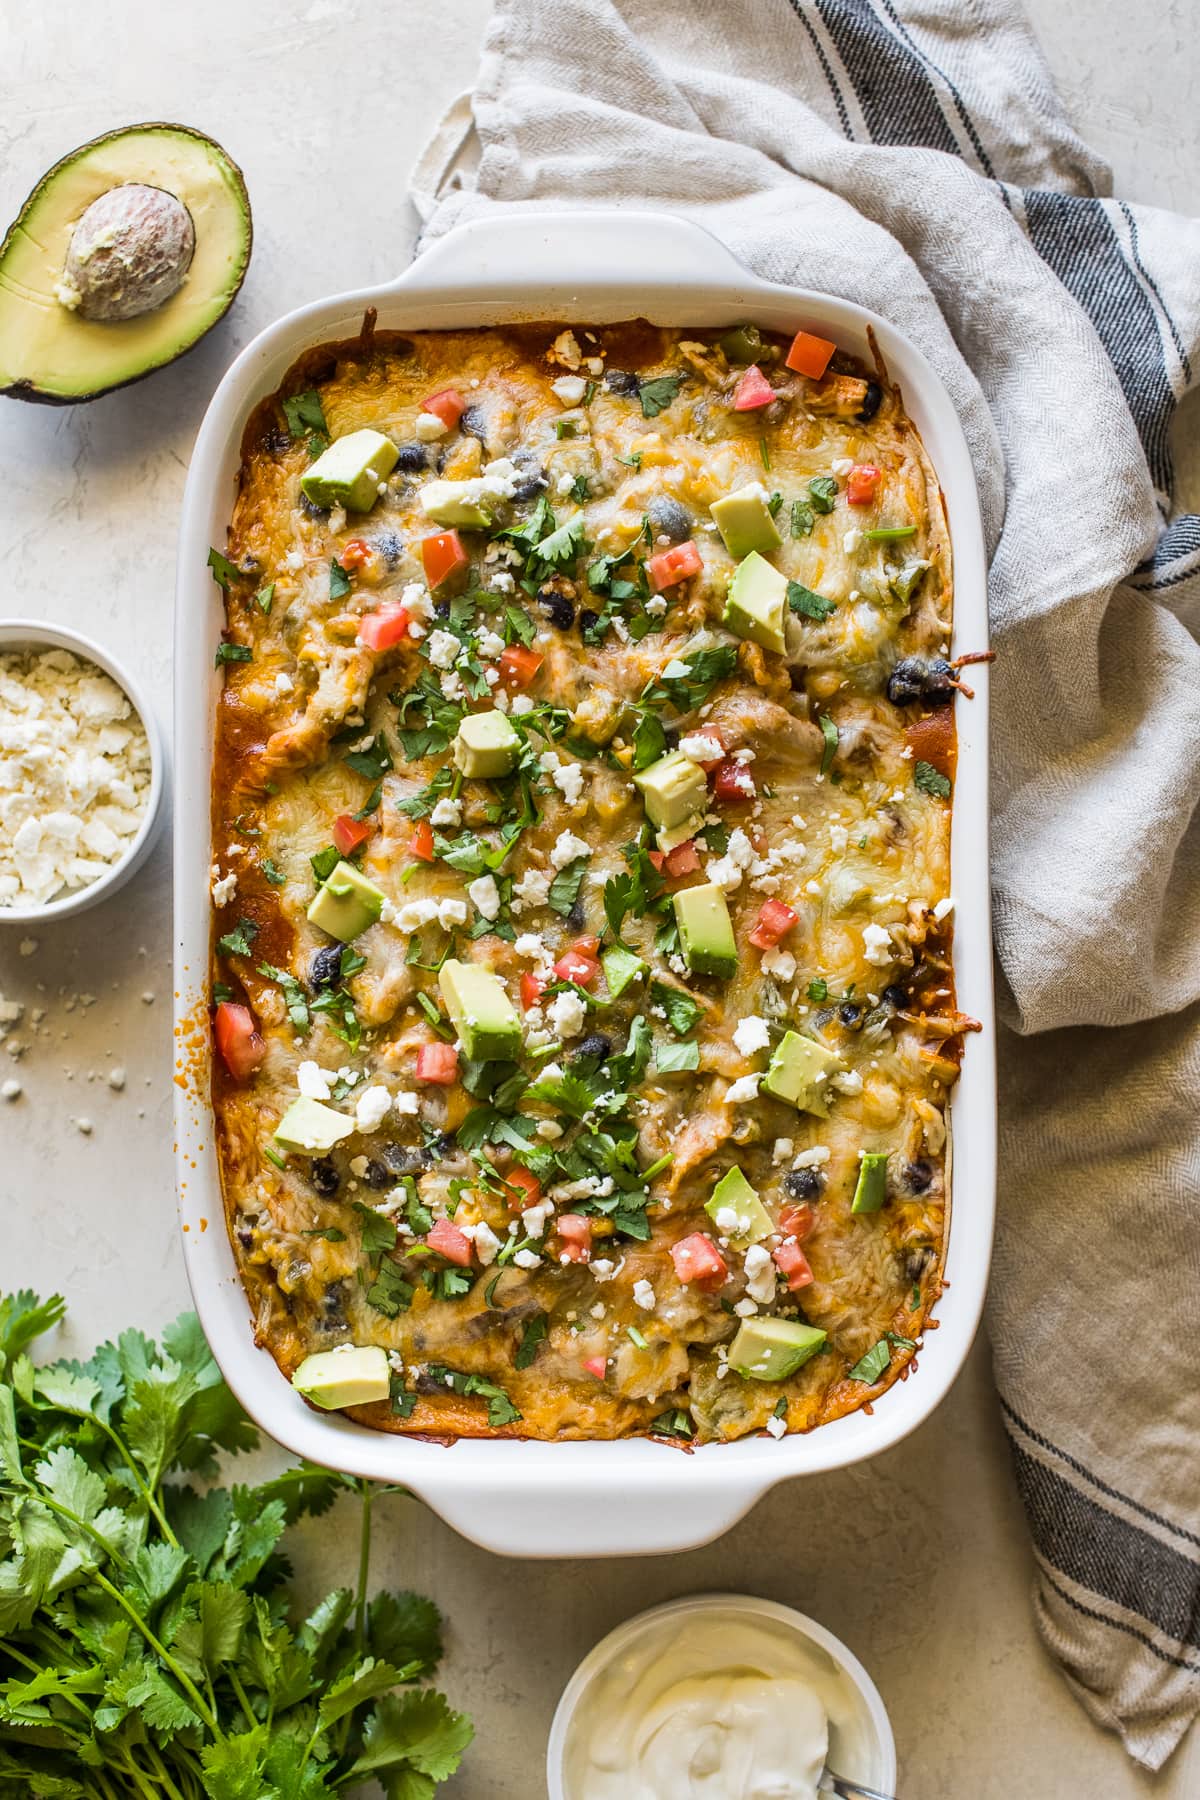 Chicken enchilada casserole topped with cilantro, diced tomatoes, and avocados.